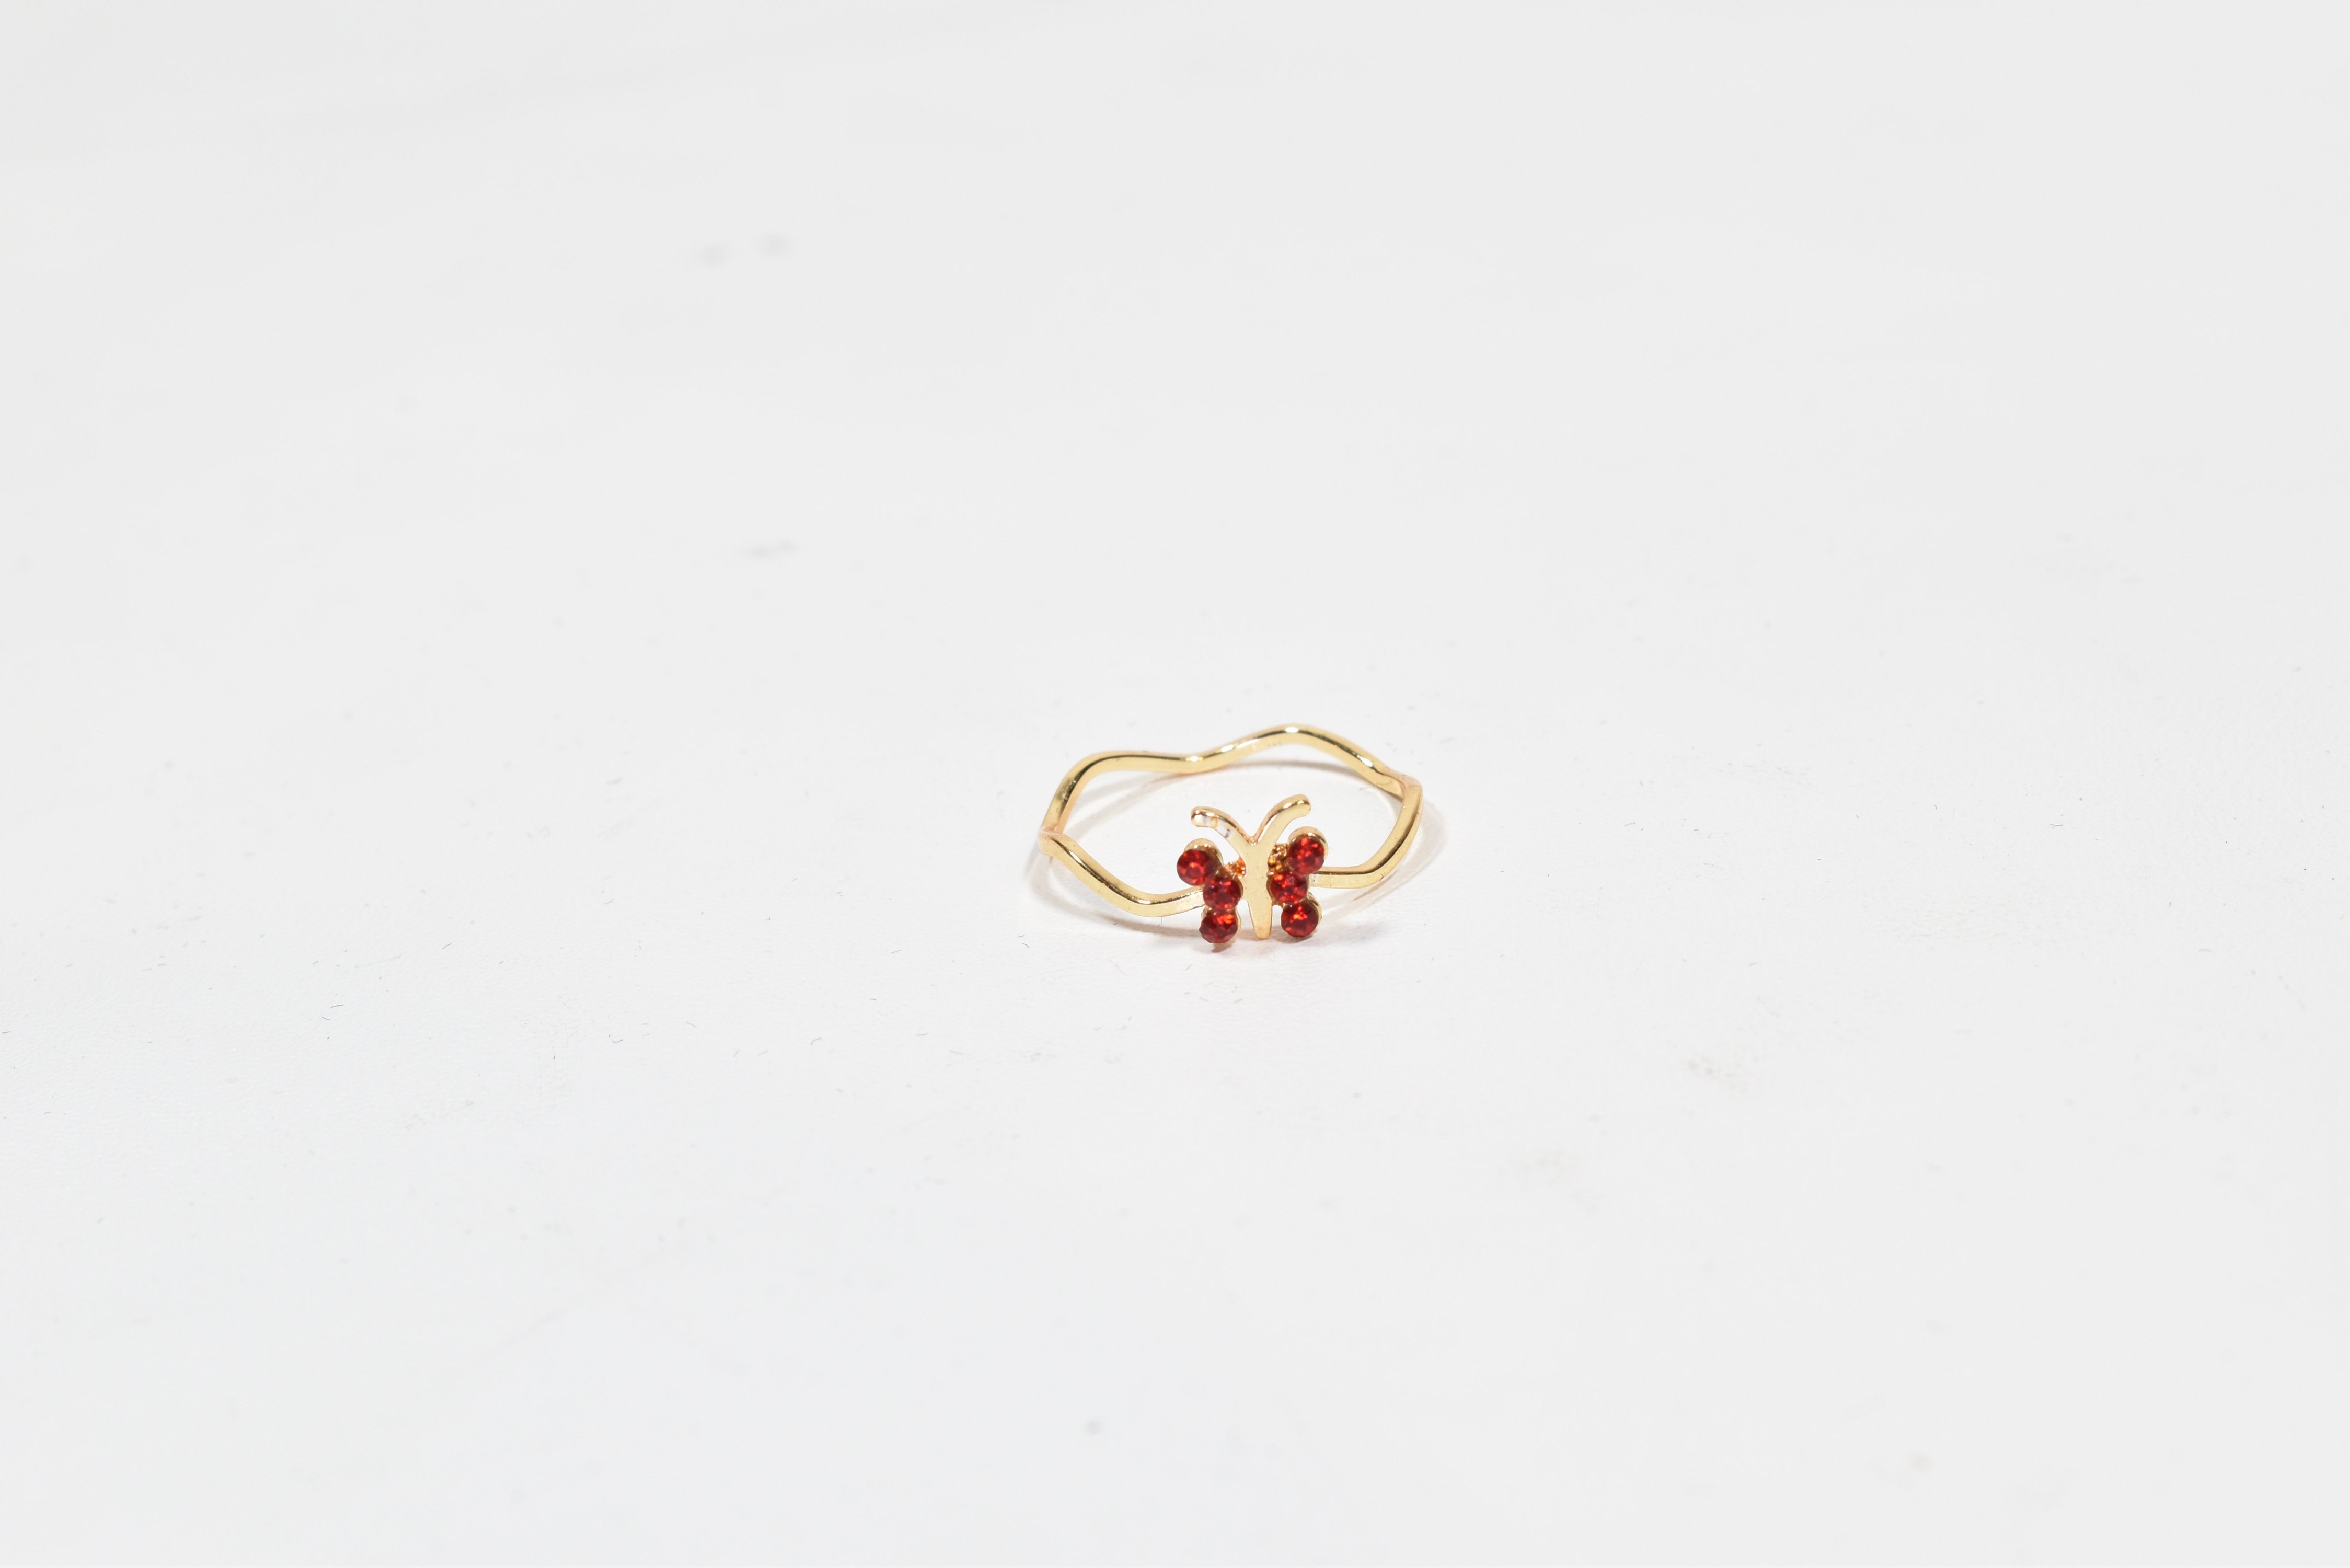 Light Siam July Birth stone Ring gold band used butter fly Size 7 -00065